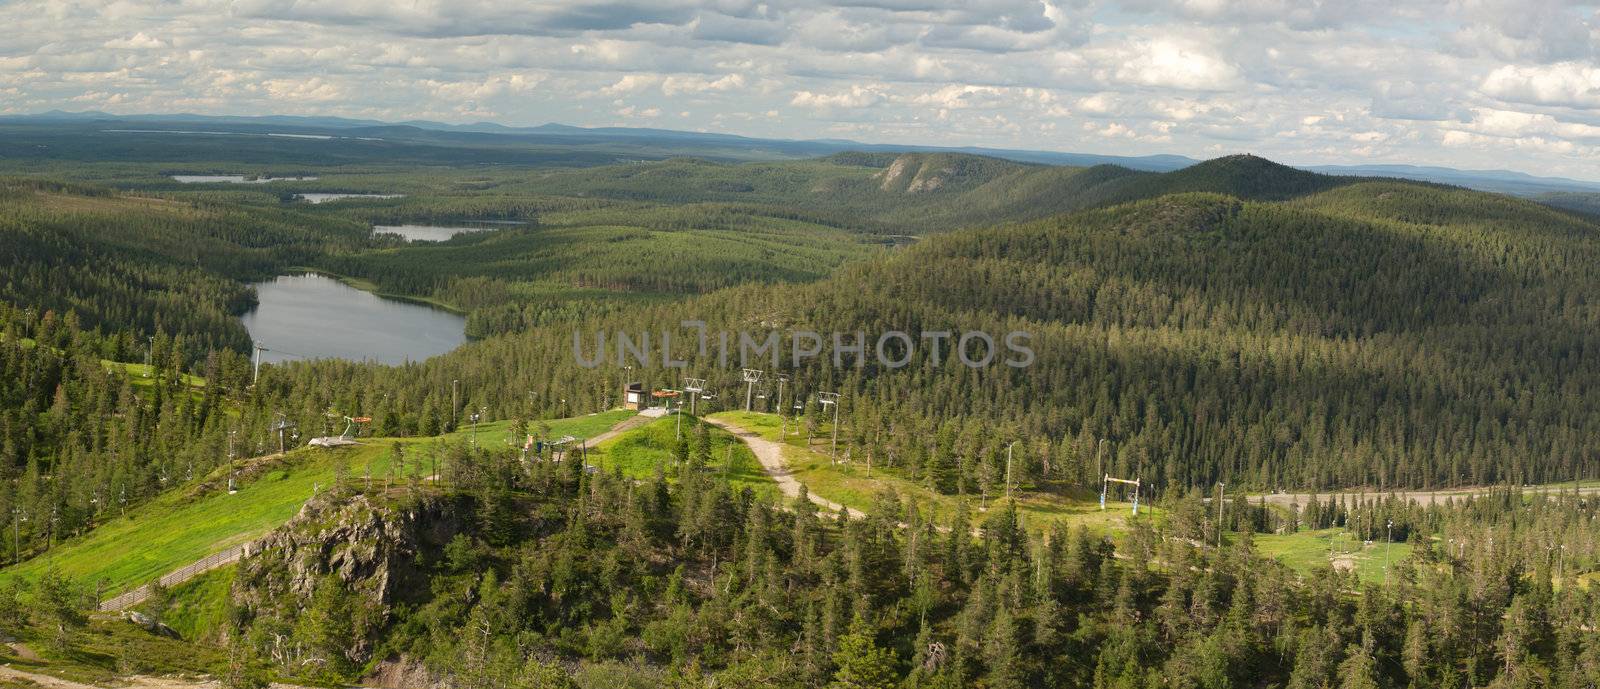 Its a Vew from Ruka ski station, most popular in Finland situated in Kuusamo region. Lakes, hills forests comming to the horizon were is the Russian Karelia, sky is covered with clouds contrasted by evening sun 